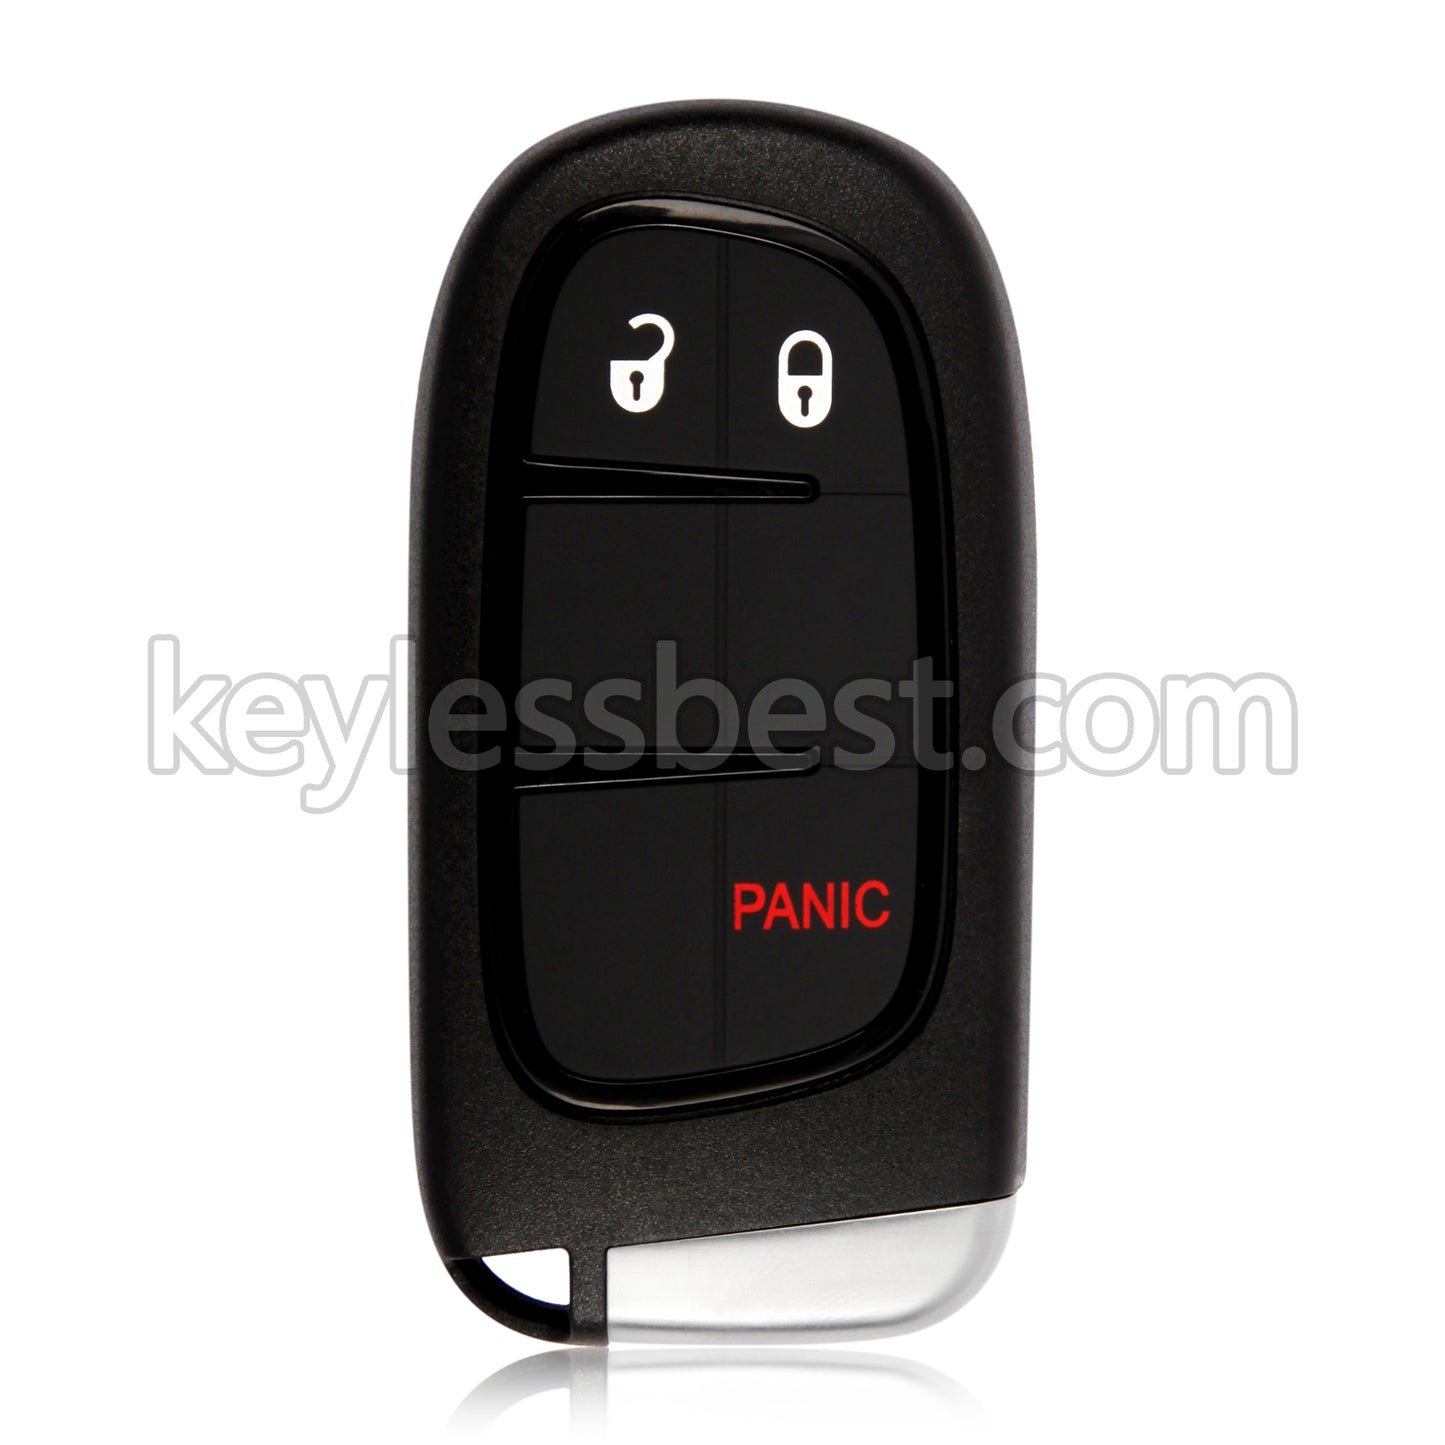 2013-2019 Dodge Ram 1500 2500 3500 / 3 Buttons Remote Key / GQ4-54T / 433MHz